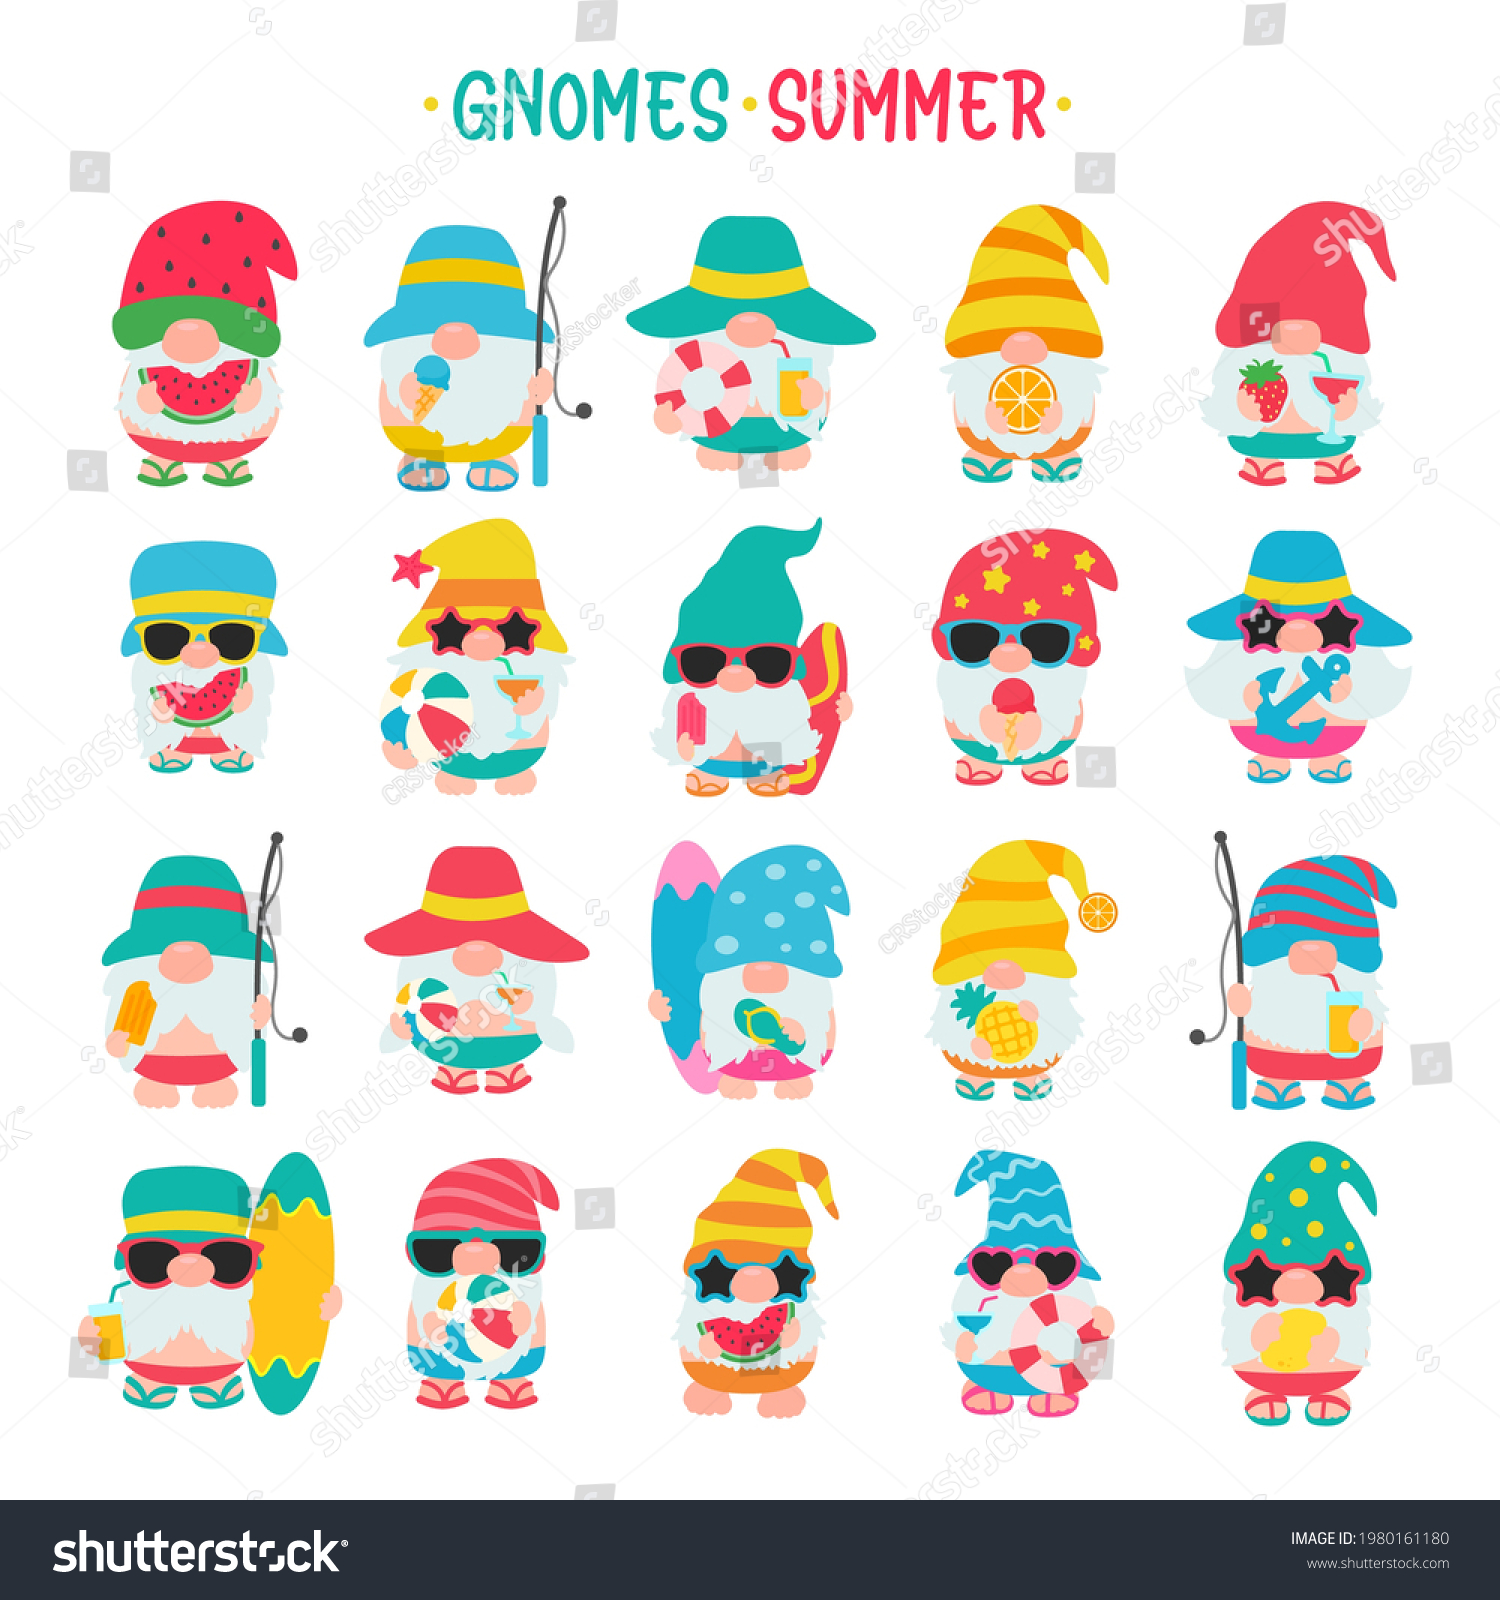 SVG of Gnomes Summer. Gnomes wear hats and sunglasses for summer trips to the beach. svg